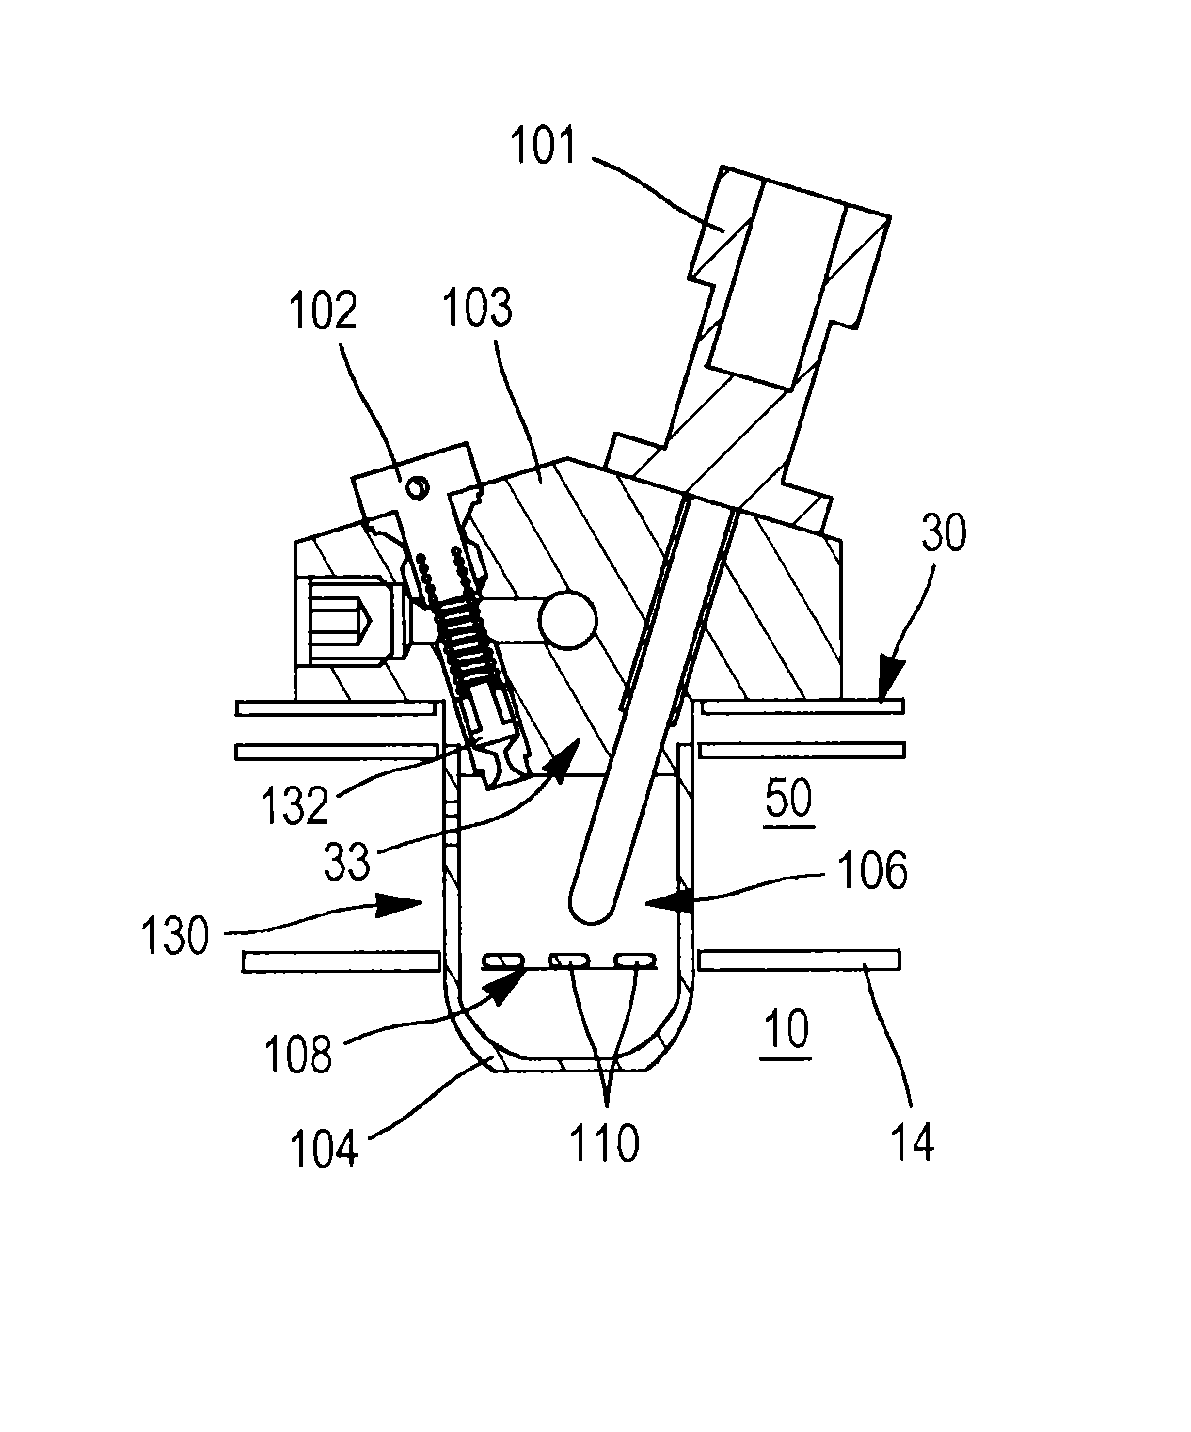 Two-circuit injector for a turbine engine combustion chamber